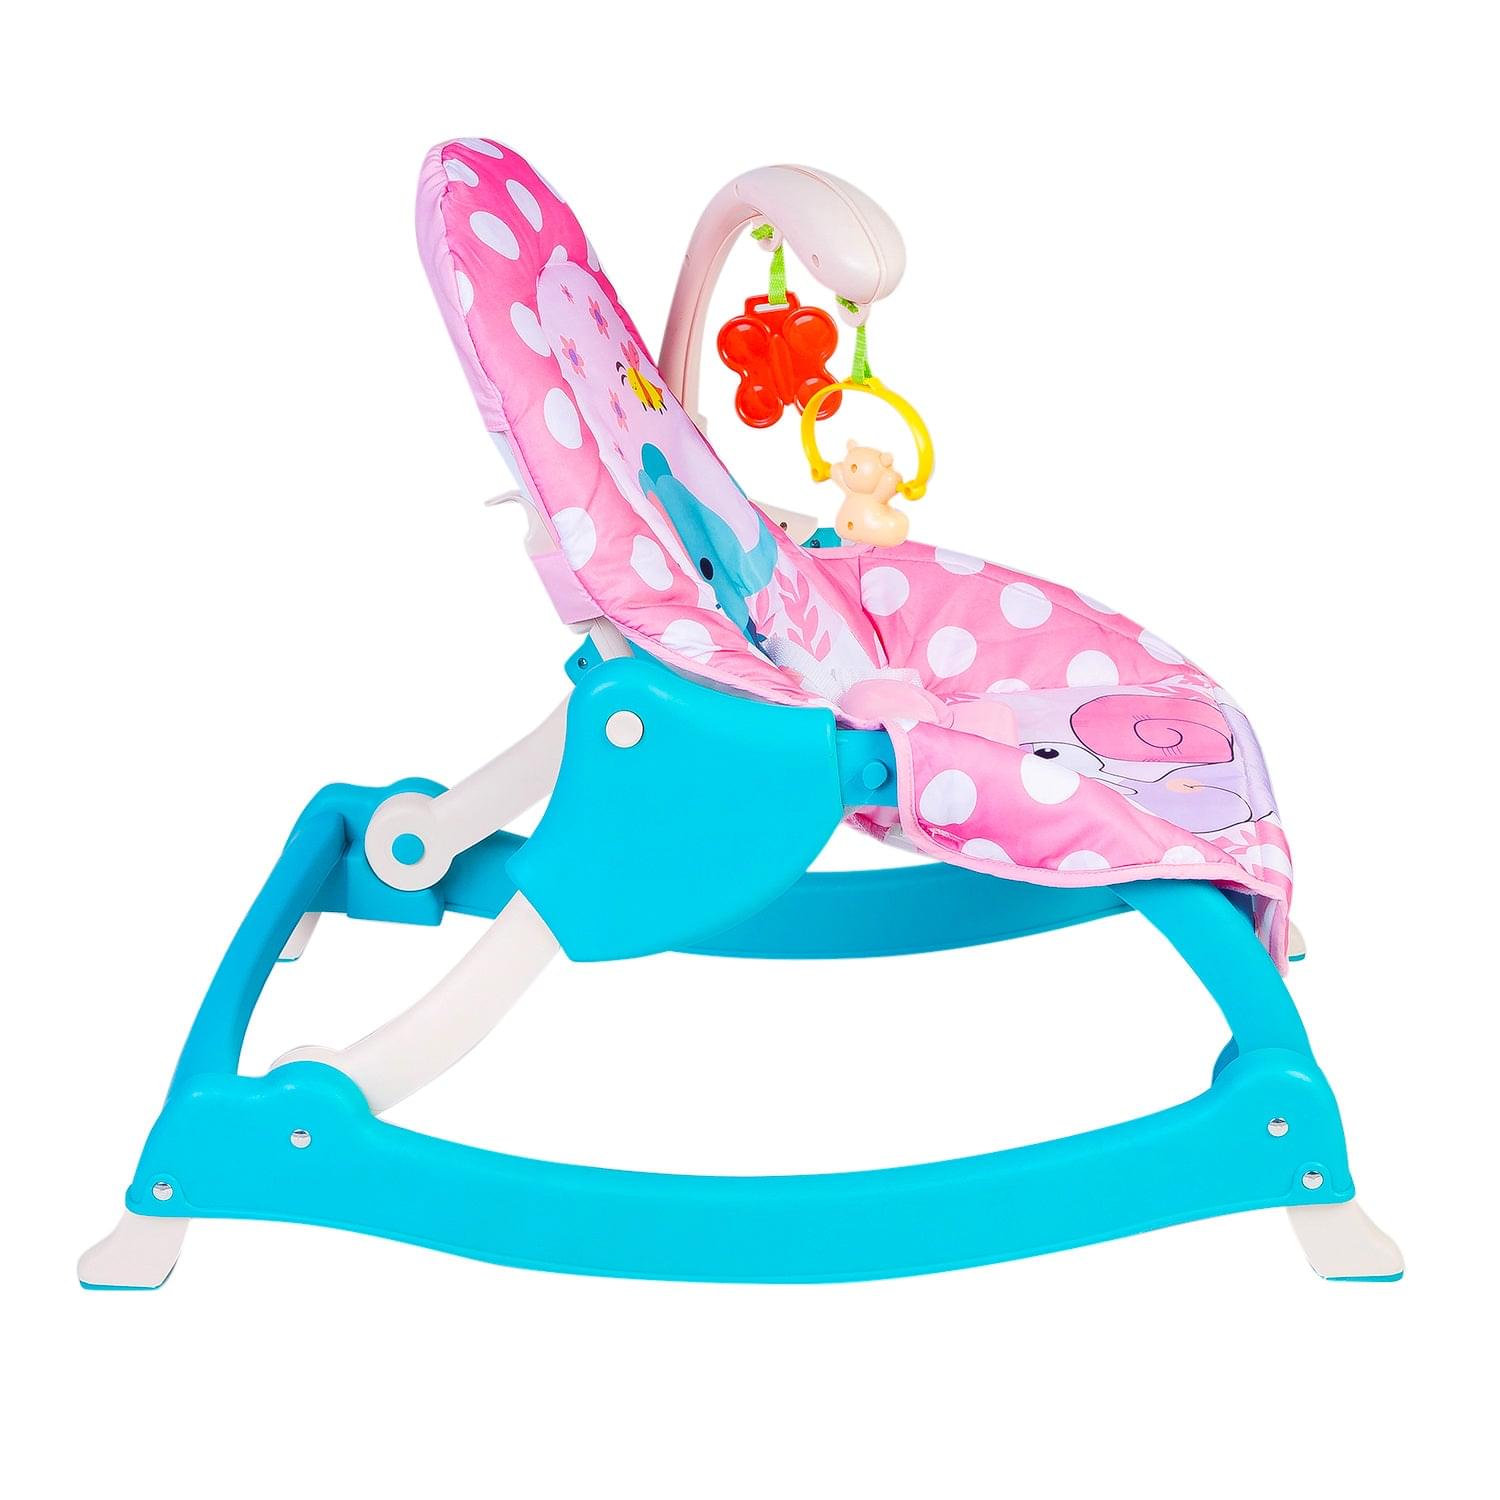 3 Adjustable Level Backrest Musical Baby Rocking Chair Pink Polka Dot - Baby Moo